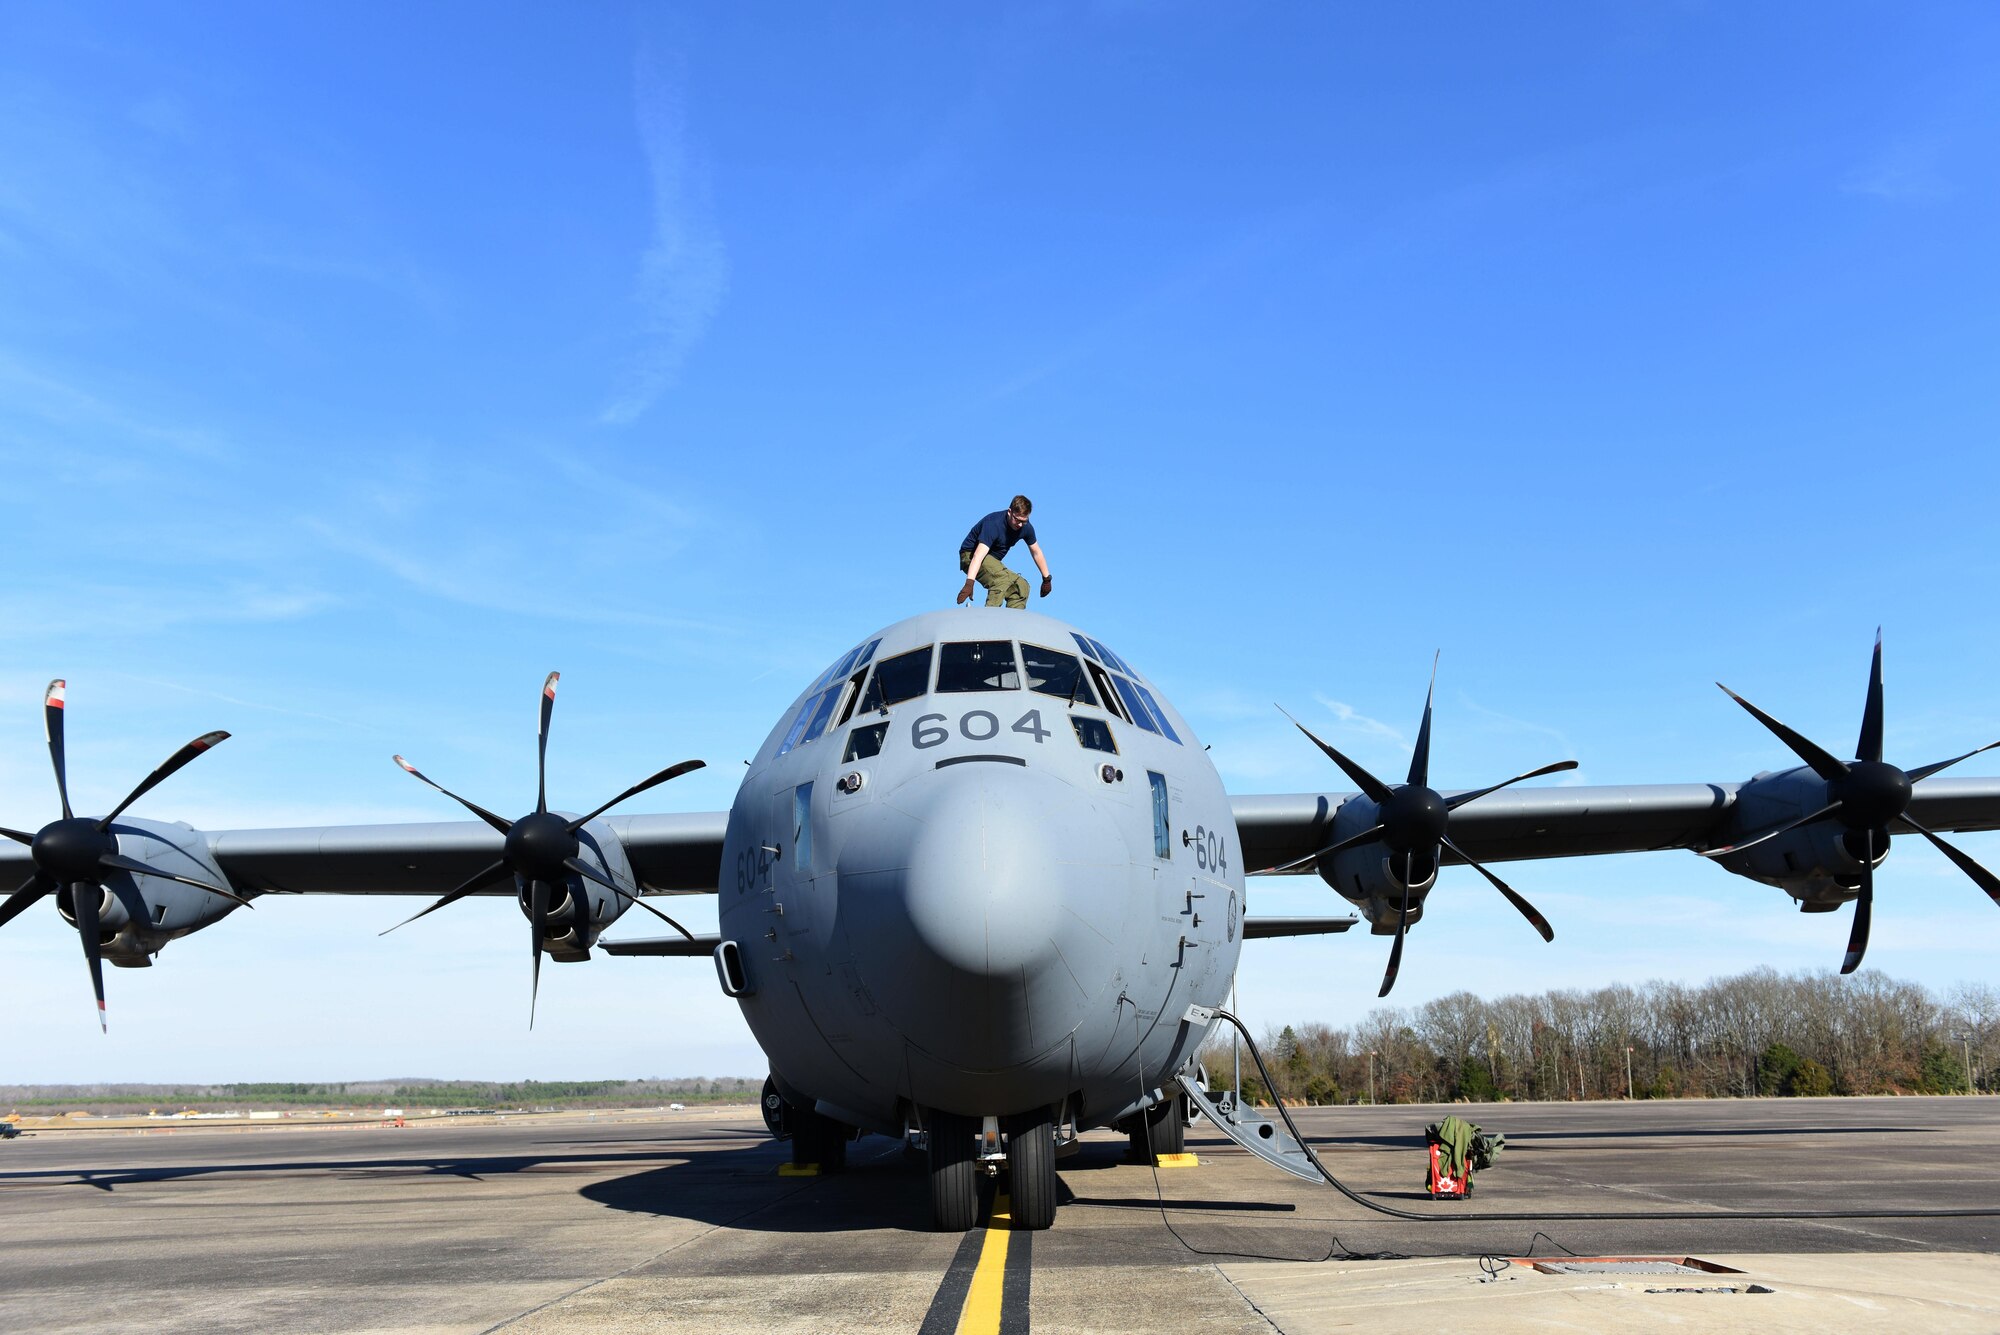 Royal Canadian Air Force Cpl. Julien Simard, 436 Transport Squadron loadmaster, enters a C-130J during a pre-flight check Feb. 10, 2017, at Little Rock Air Force Base, Ark. Two aircraft and approximately 70 personnel from the RCAF came to Little Rock AFB to participate in Green Flag Little Rock 17-04. (U.S. Air Force photo by Senior Airman Mercedes Taylor)